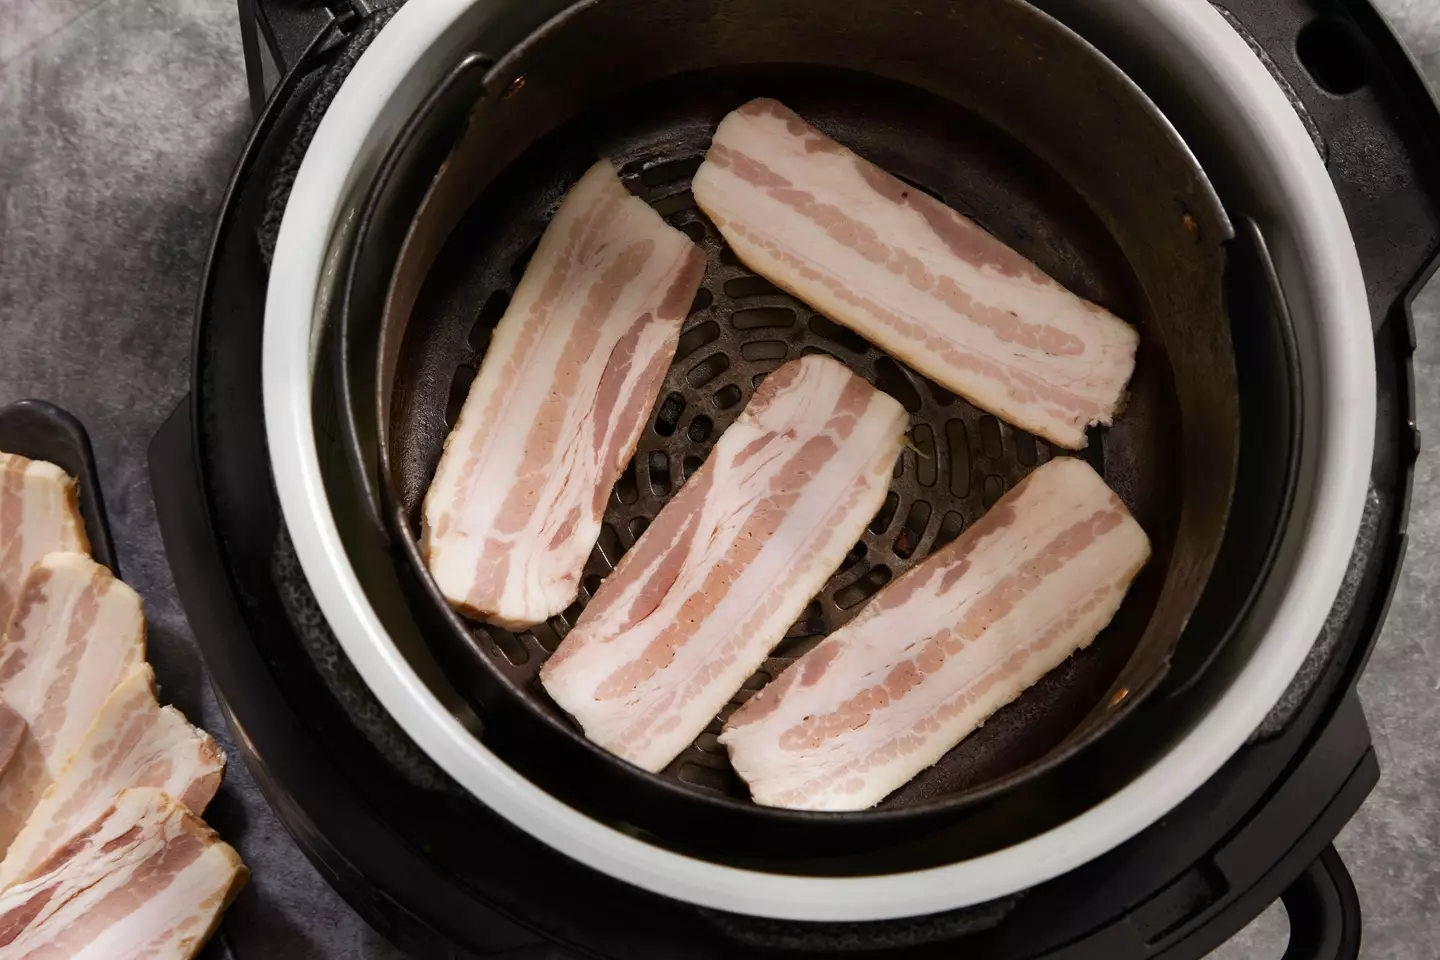 Bacon lovers have been warned against cooking it in an air fryer. (LauriPatterson / Getty Images)